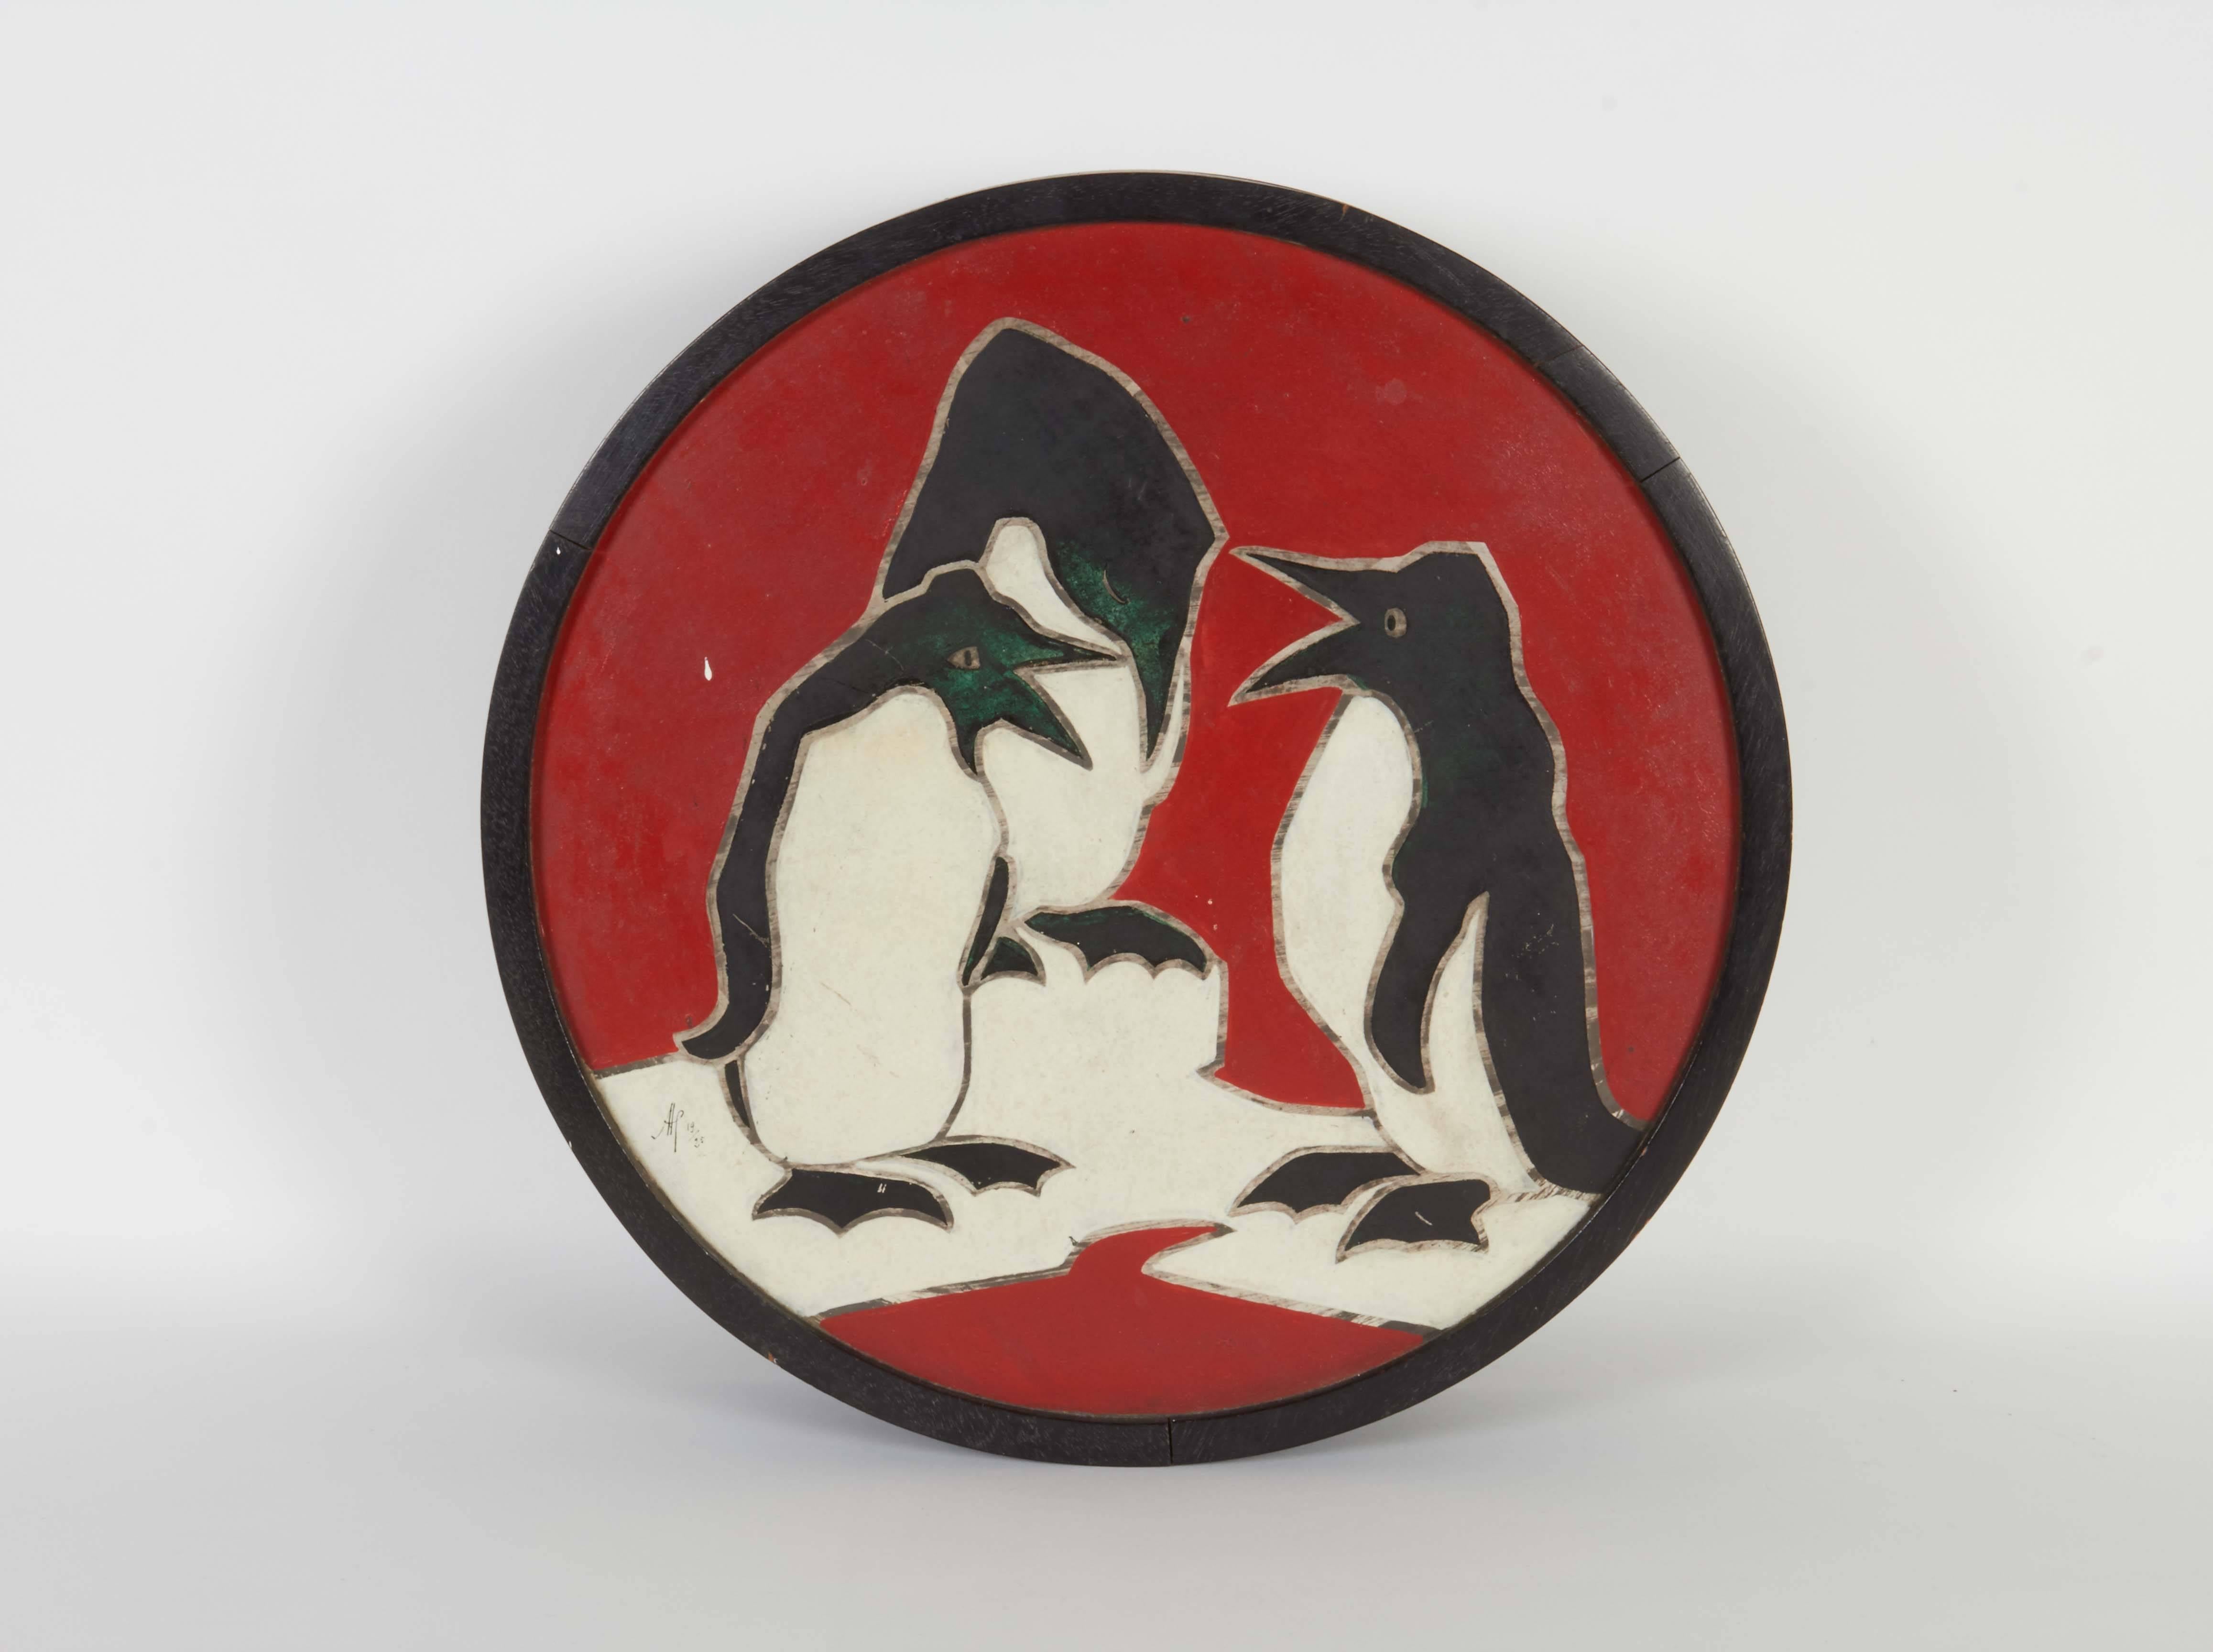 A round lidded box from the Art Deco era, produced in France circa 1920s, crafted of wood, the lid decorated with painted marquetry, depicting penguins congregating. Markings include [AP 19/25] signed to the lid. This piece remains in very good